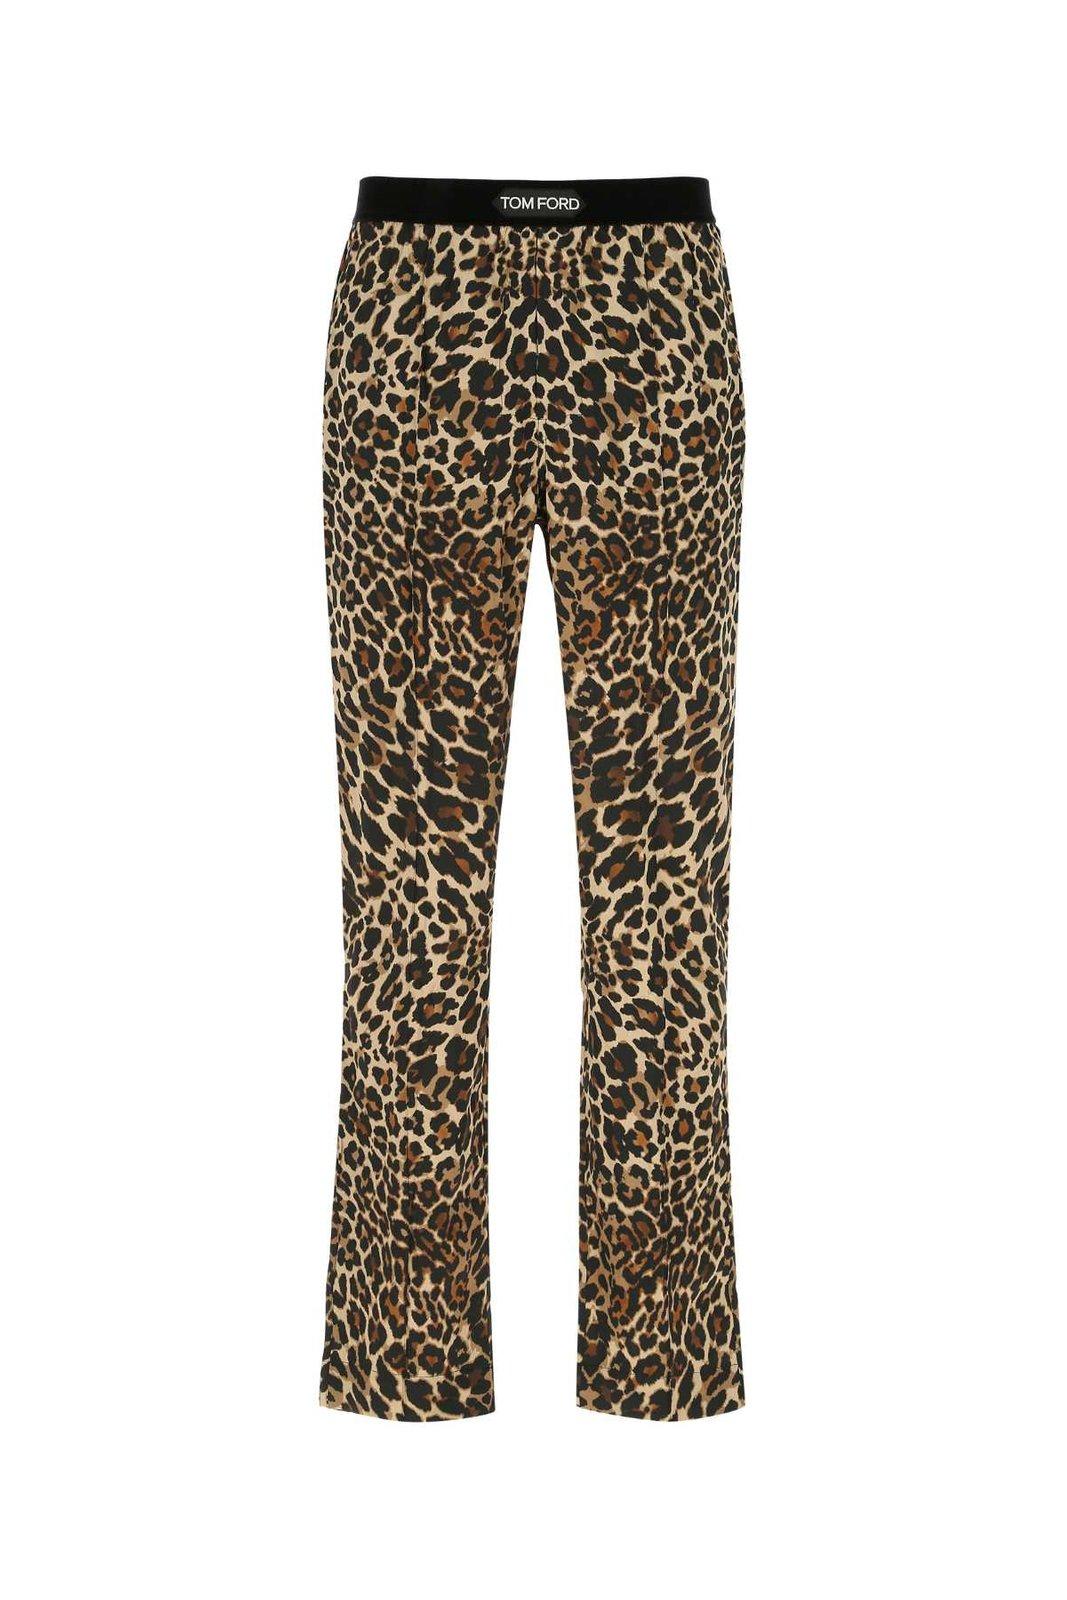 Tom Ford Leopard-printed Stretched Pajama Trousers